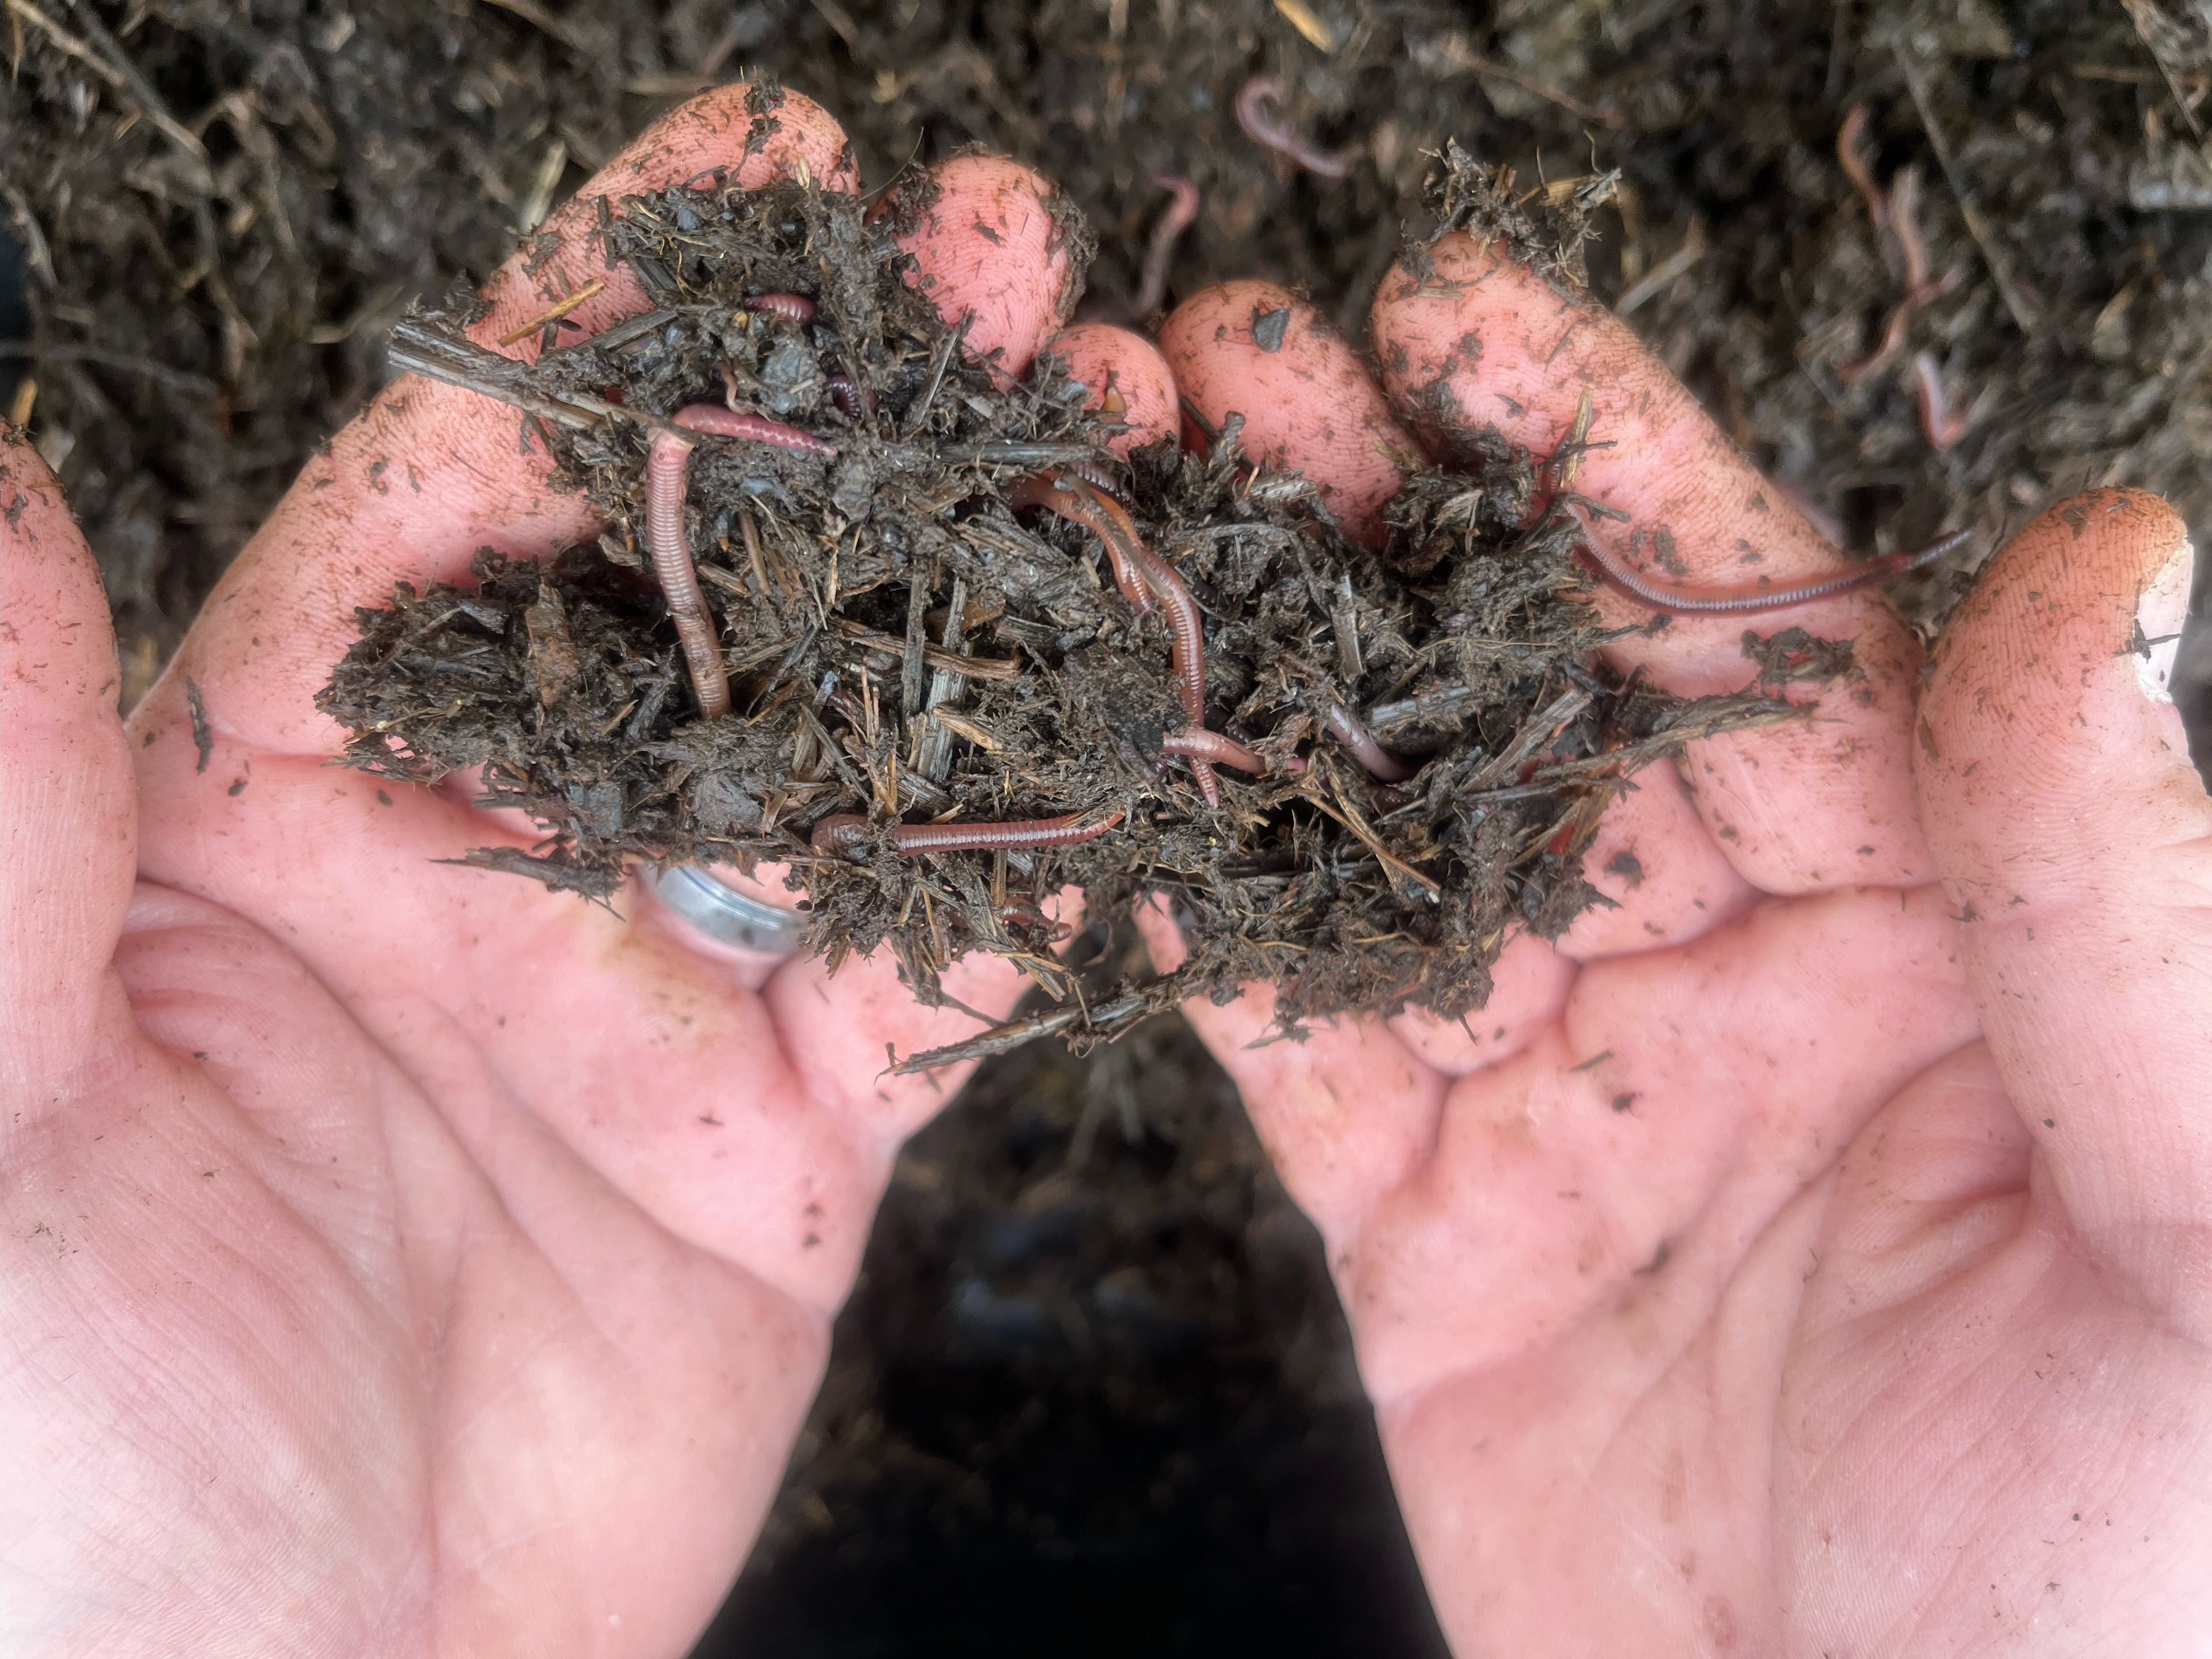 Worms and dirt in a person’s hands